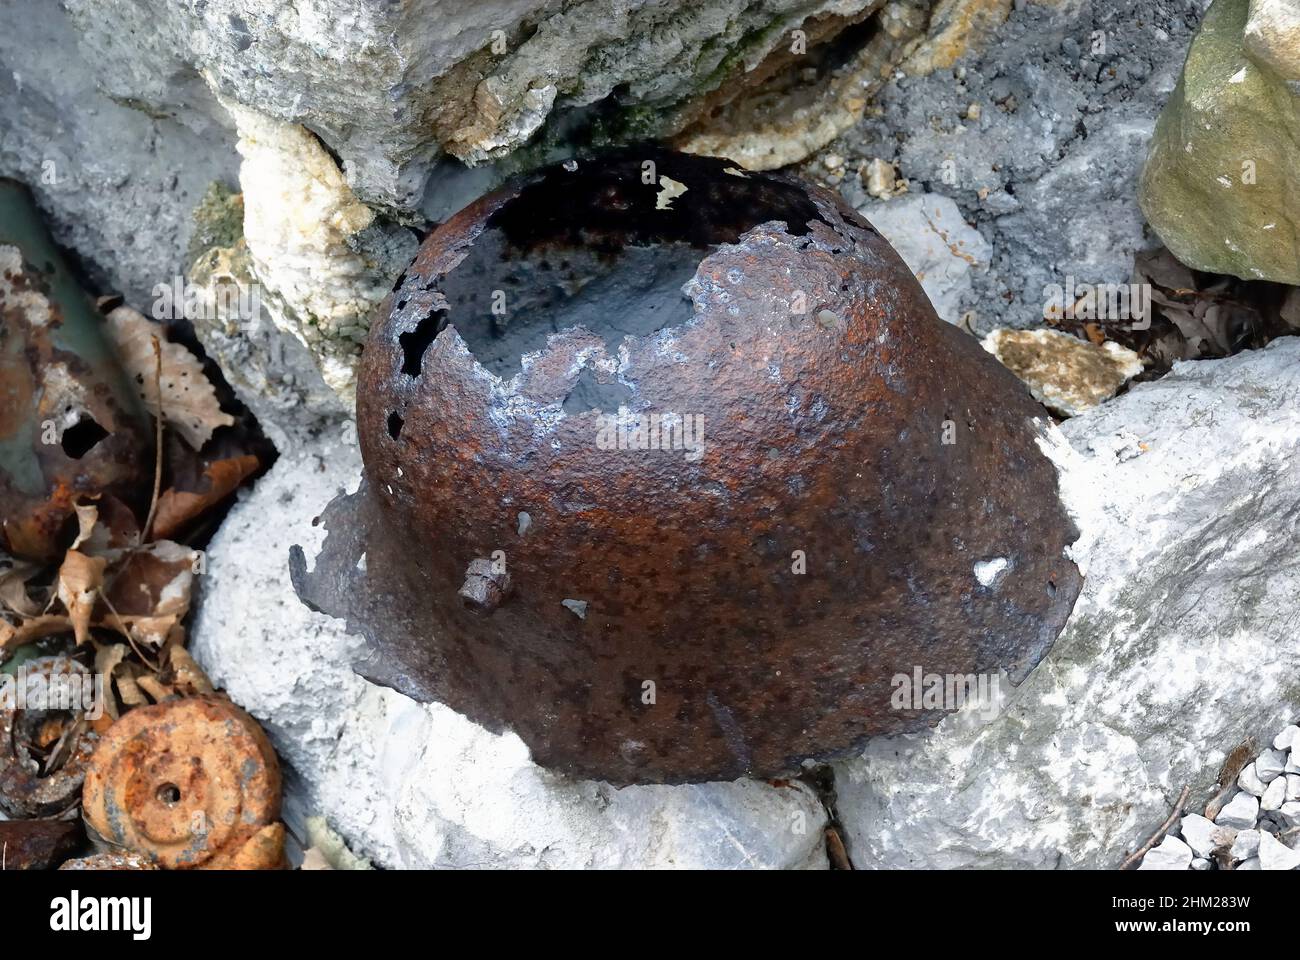 Mount Vodice (SLO) WWI : a German helmet. Its alloy of steel and nickel-chrome, more than one millimetre thick, was the most effective head protection in World War One. The helmet also contained a first-aid kit inside. Stock Photo